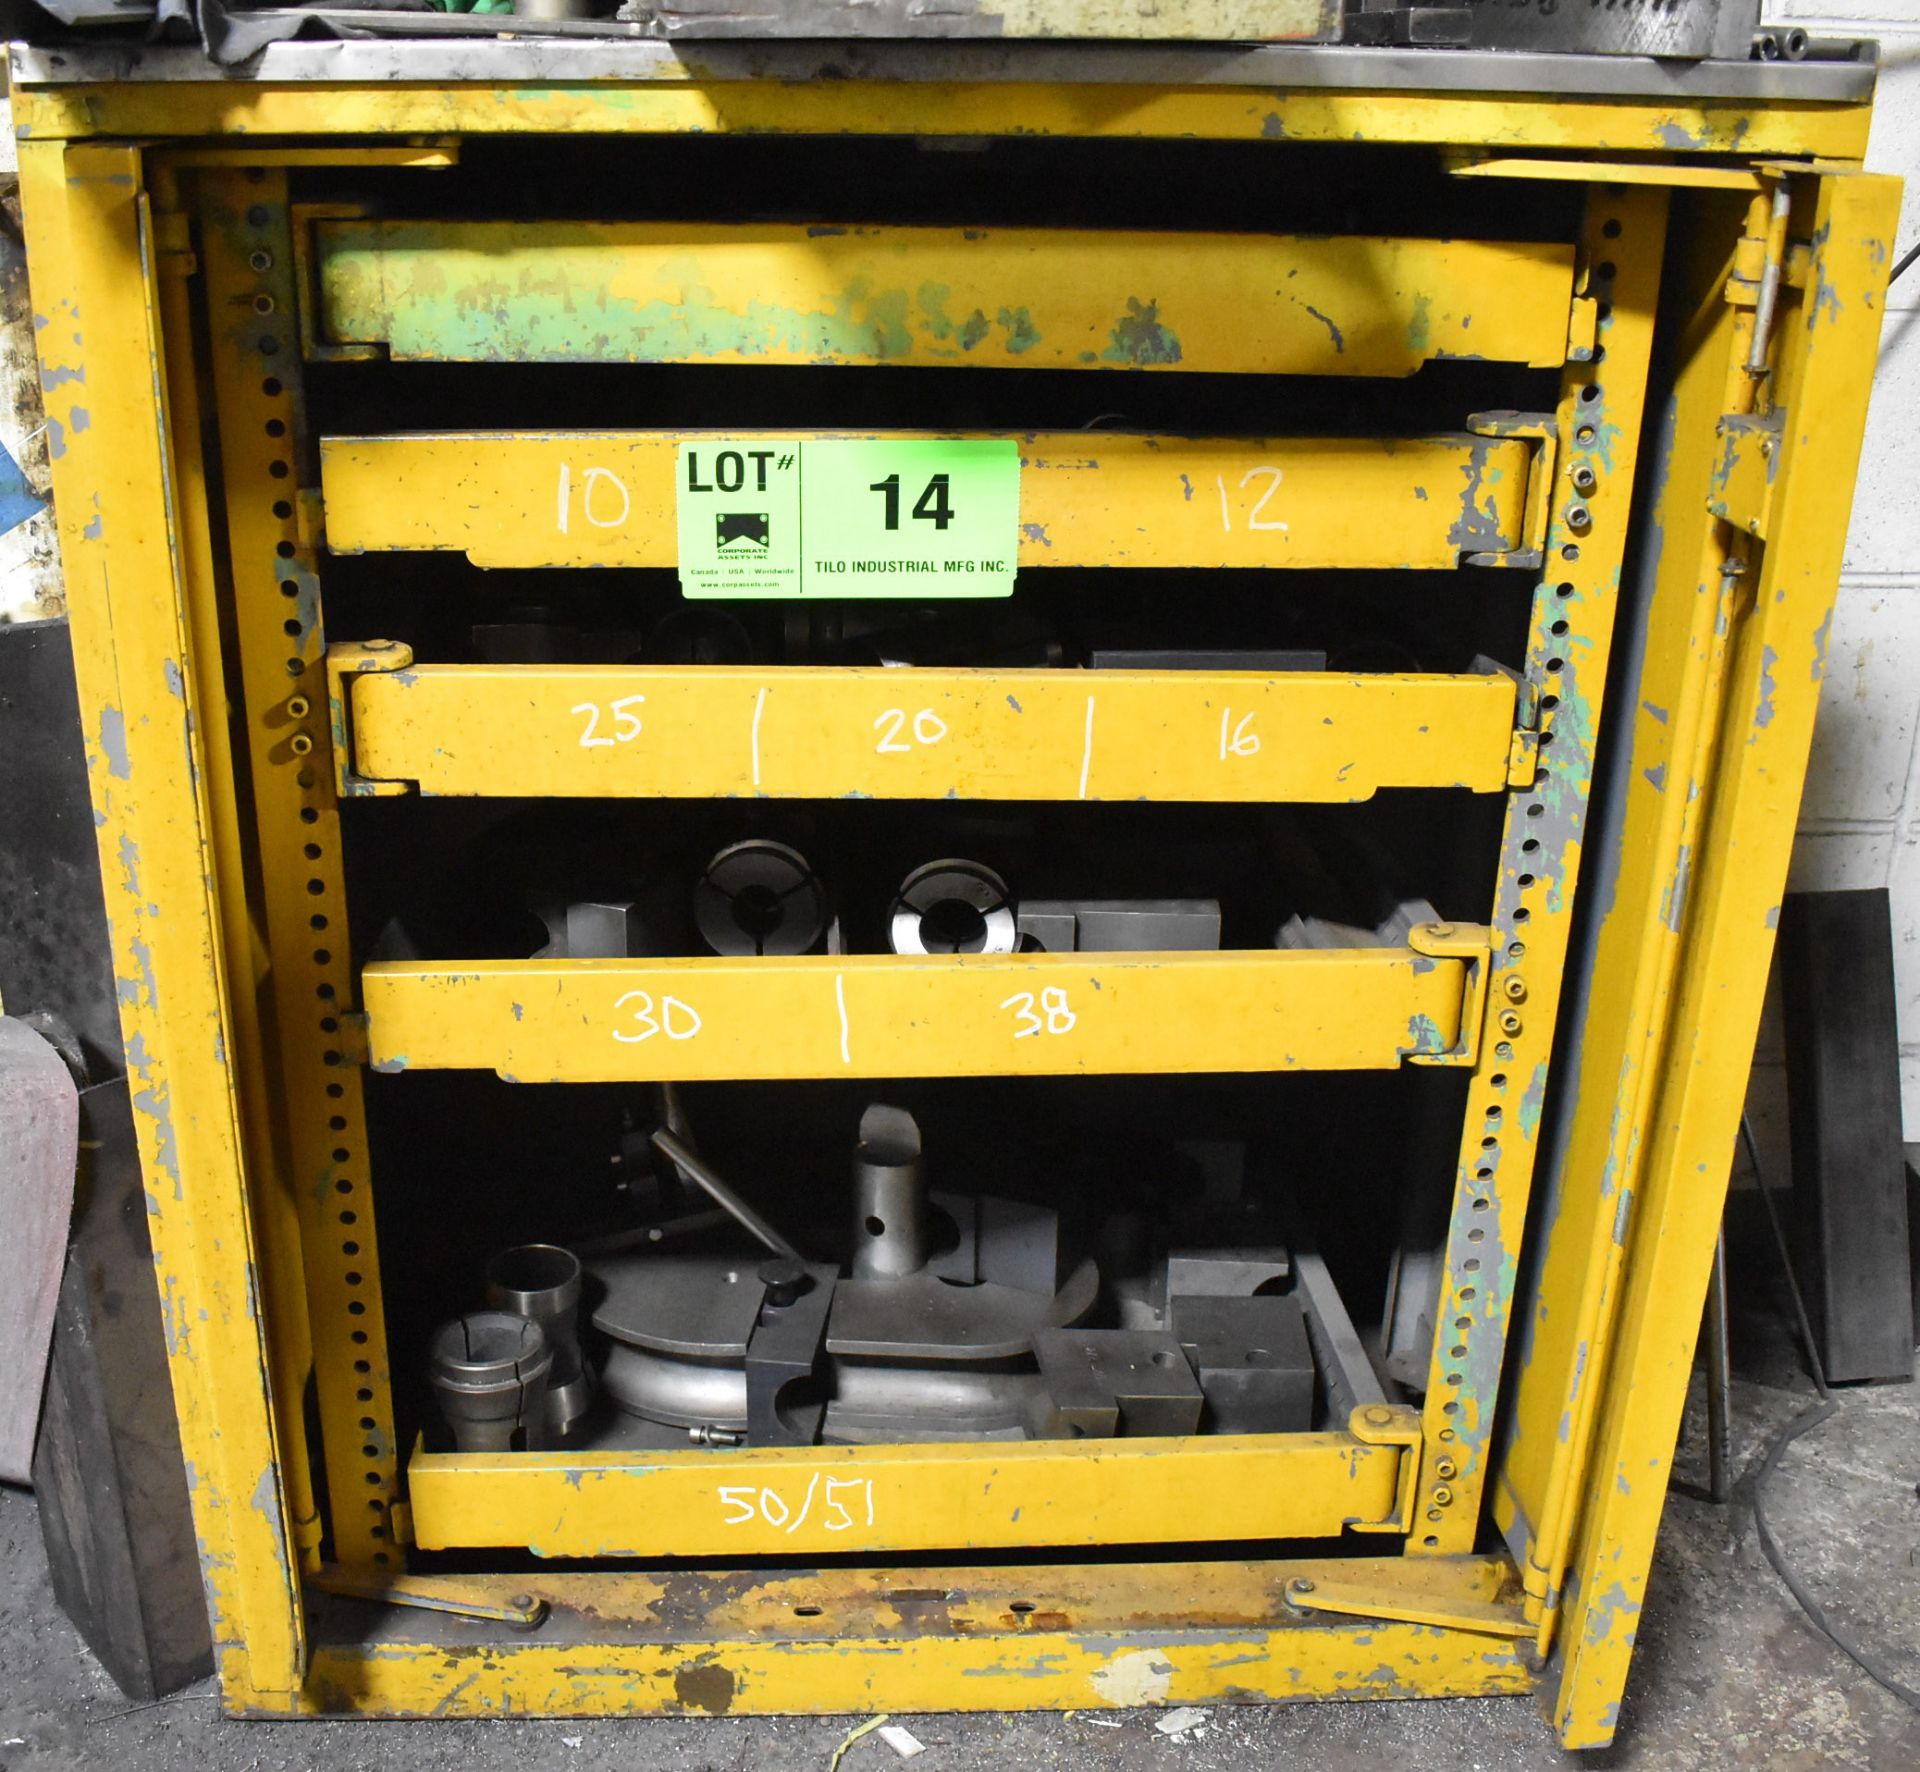 LOT/ CABINET WITH PIPE BENDER TOOLING - COLLETS AND DIES: OD 0.23"X0.039" WALL TO OD 1.5"X0.11" WALL